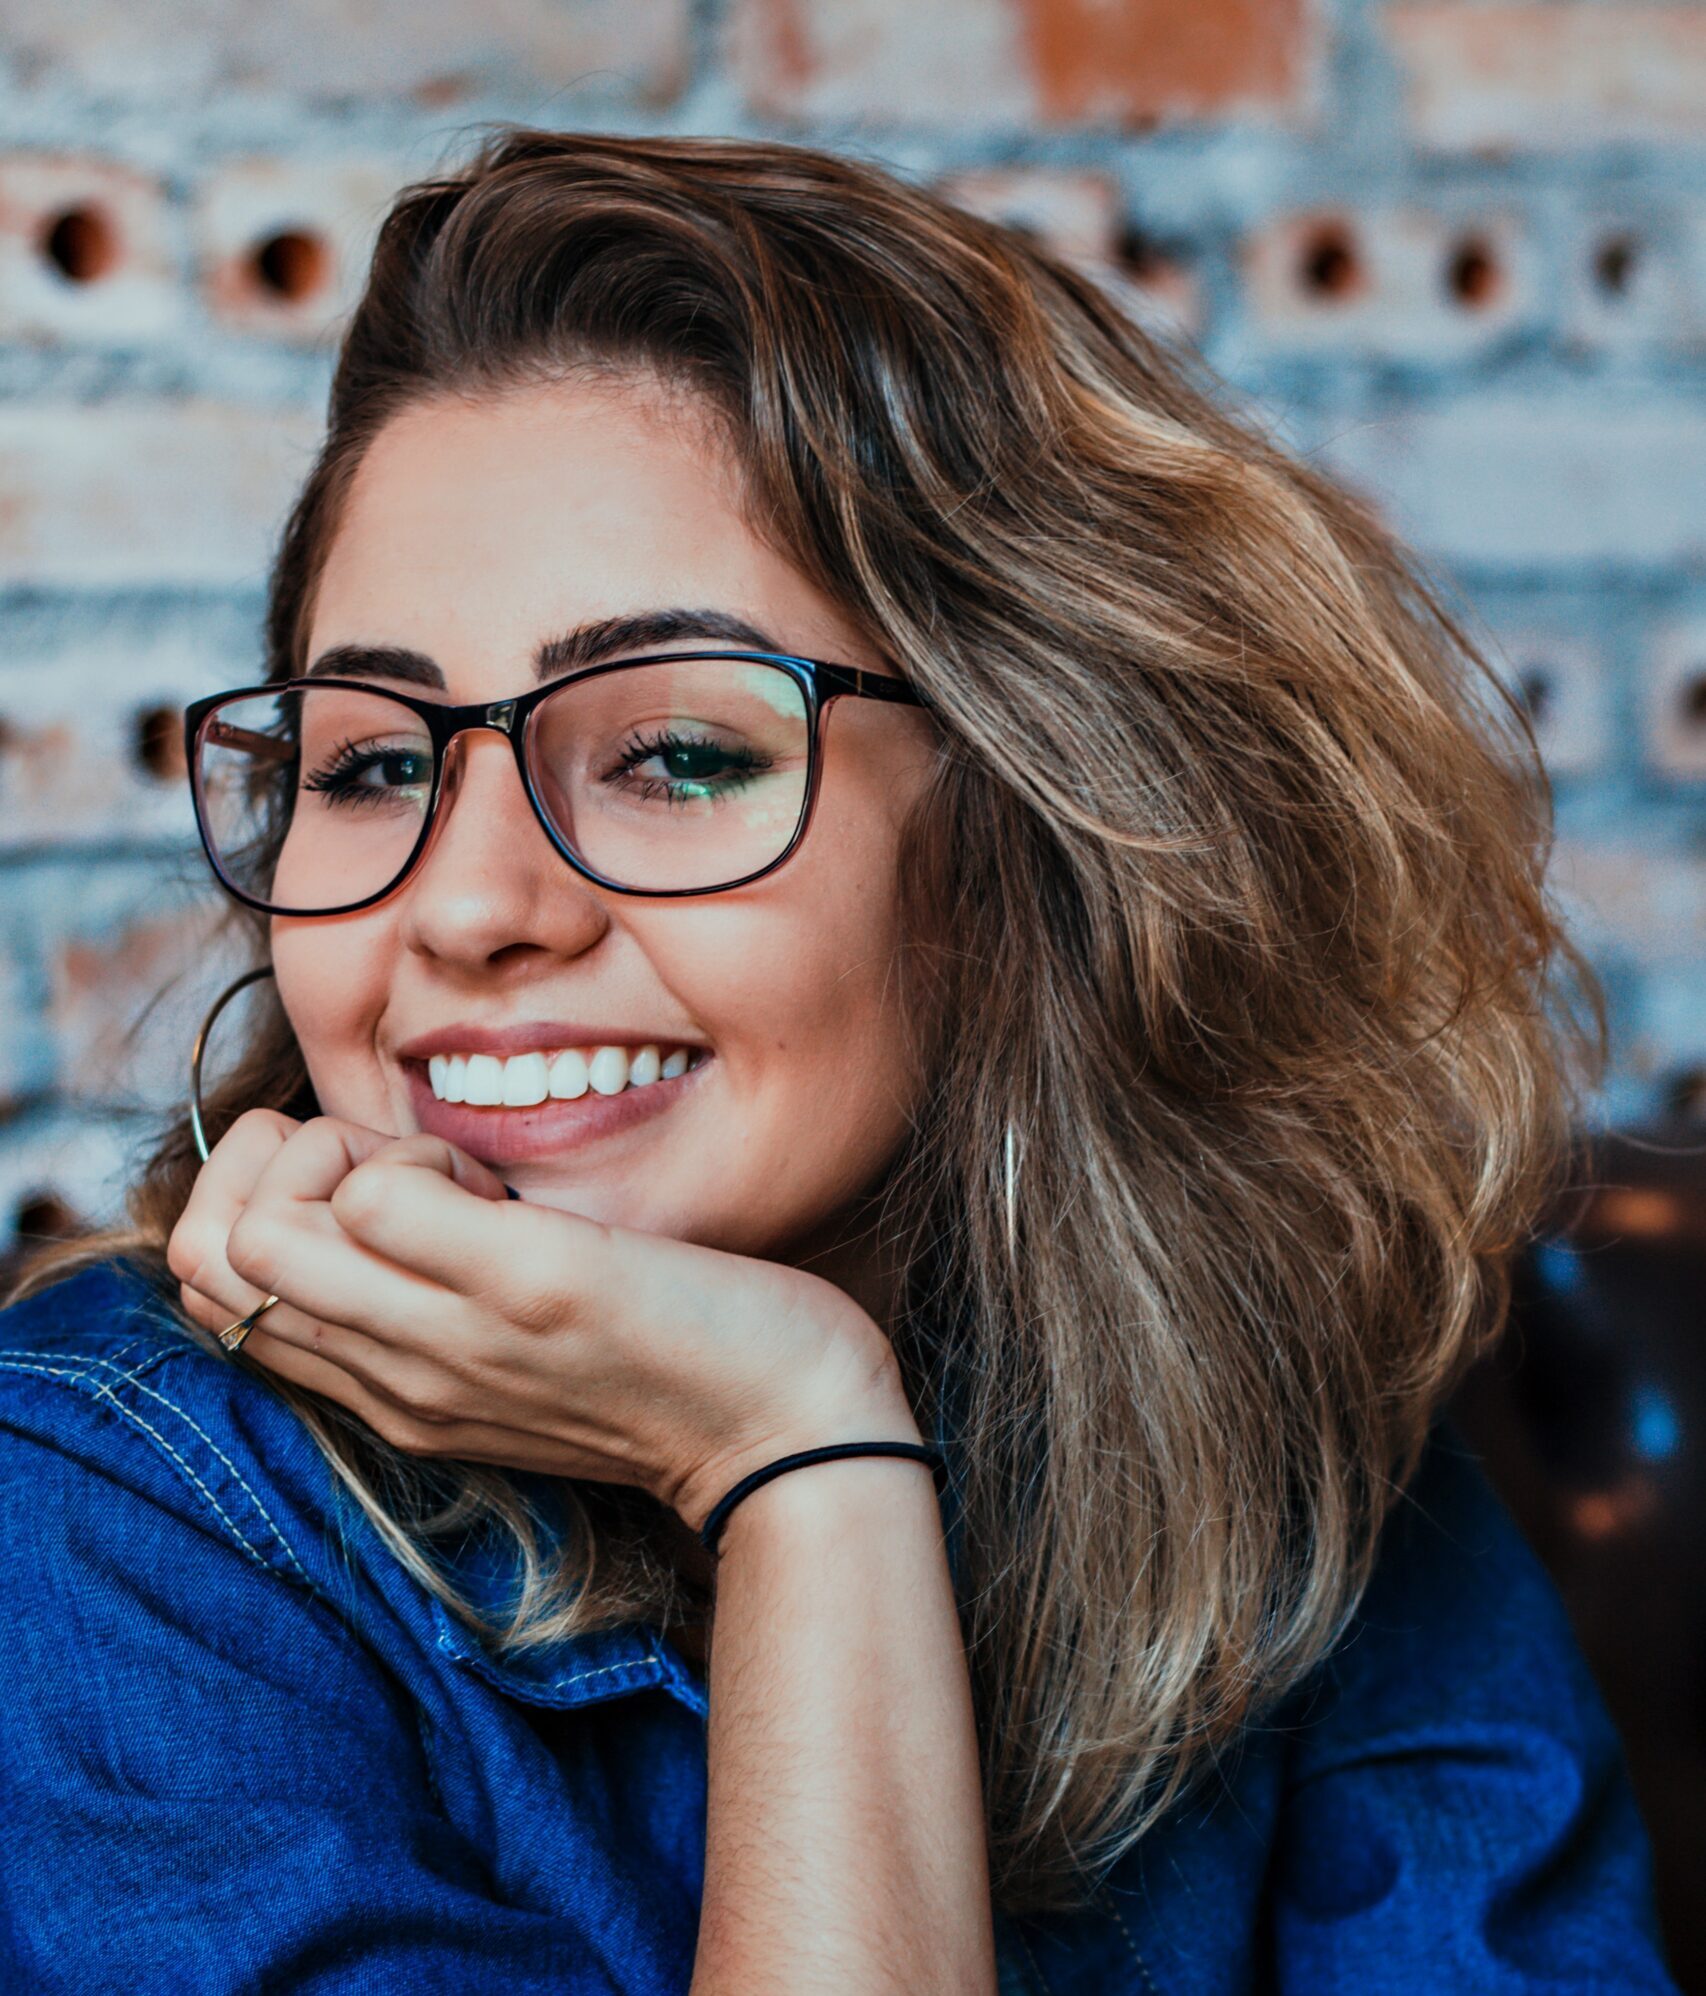 At Innova Dental, we understand that your smile is an integral part of your identity. We take the time to build close relationships with our patients, getting to know your personality and history to create a smile that truly reflects who you are.